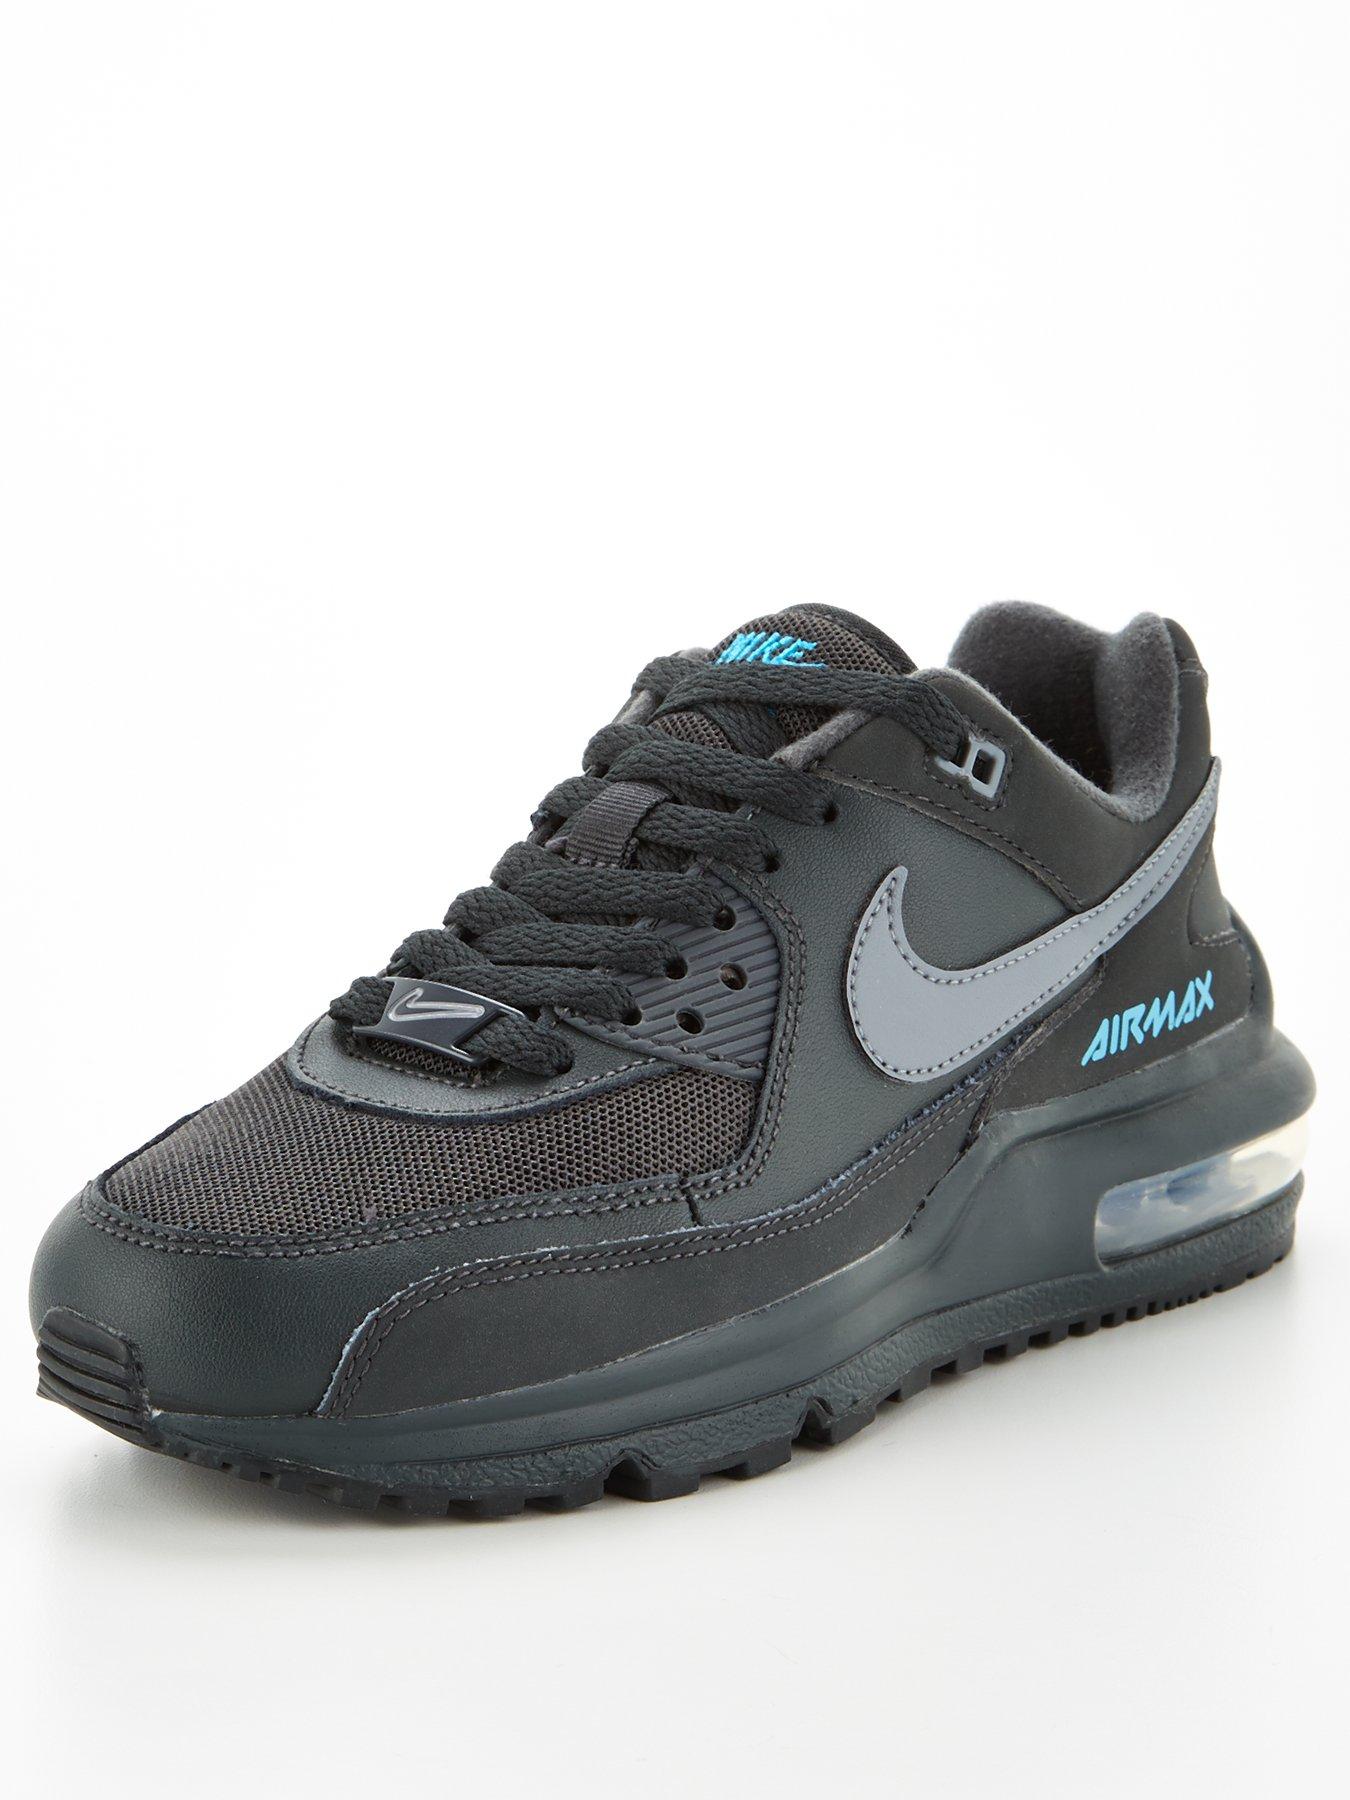 buy now pay later nike air max